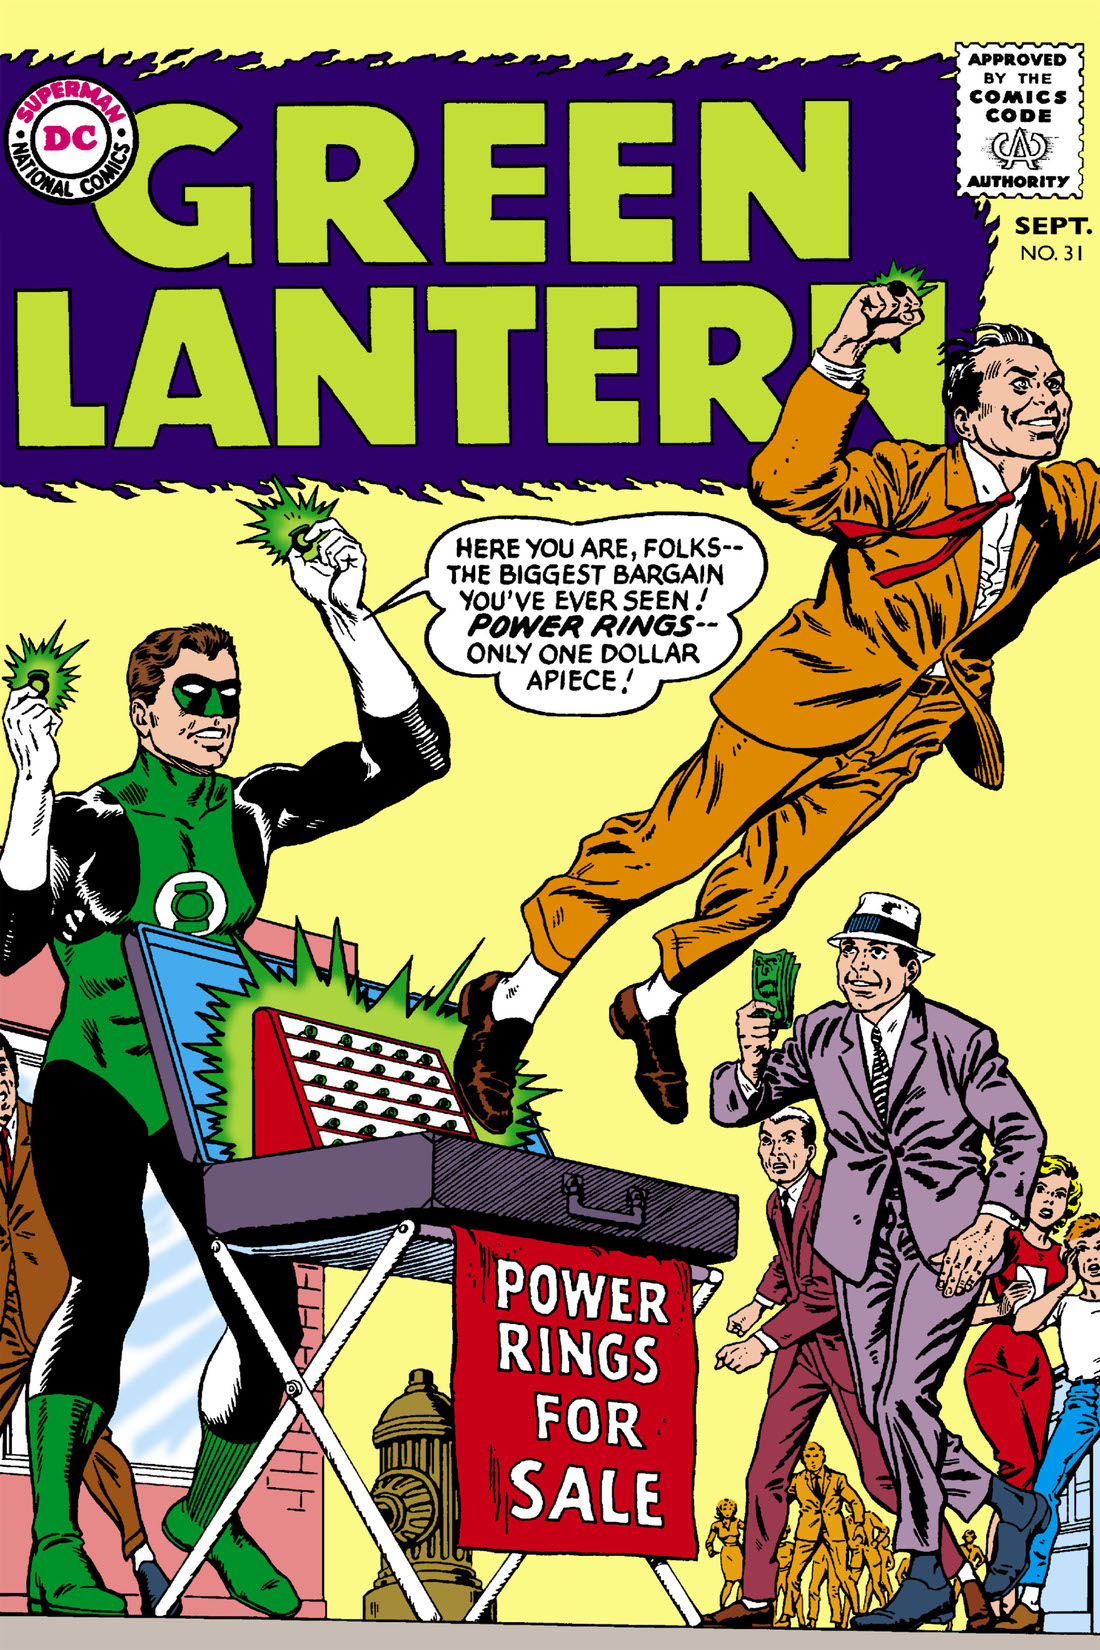 Green Lantern (1960-) #31 preview images